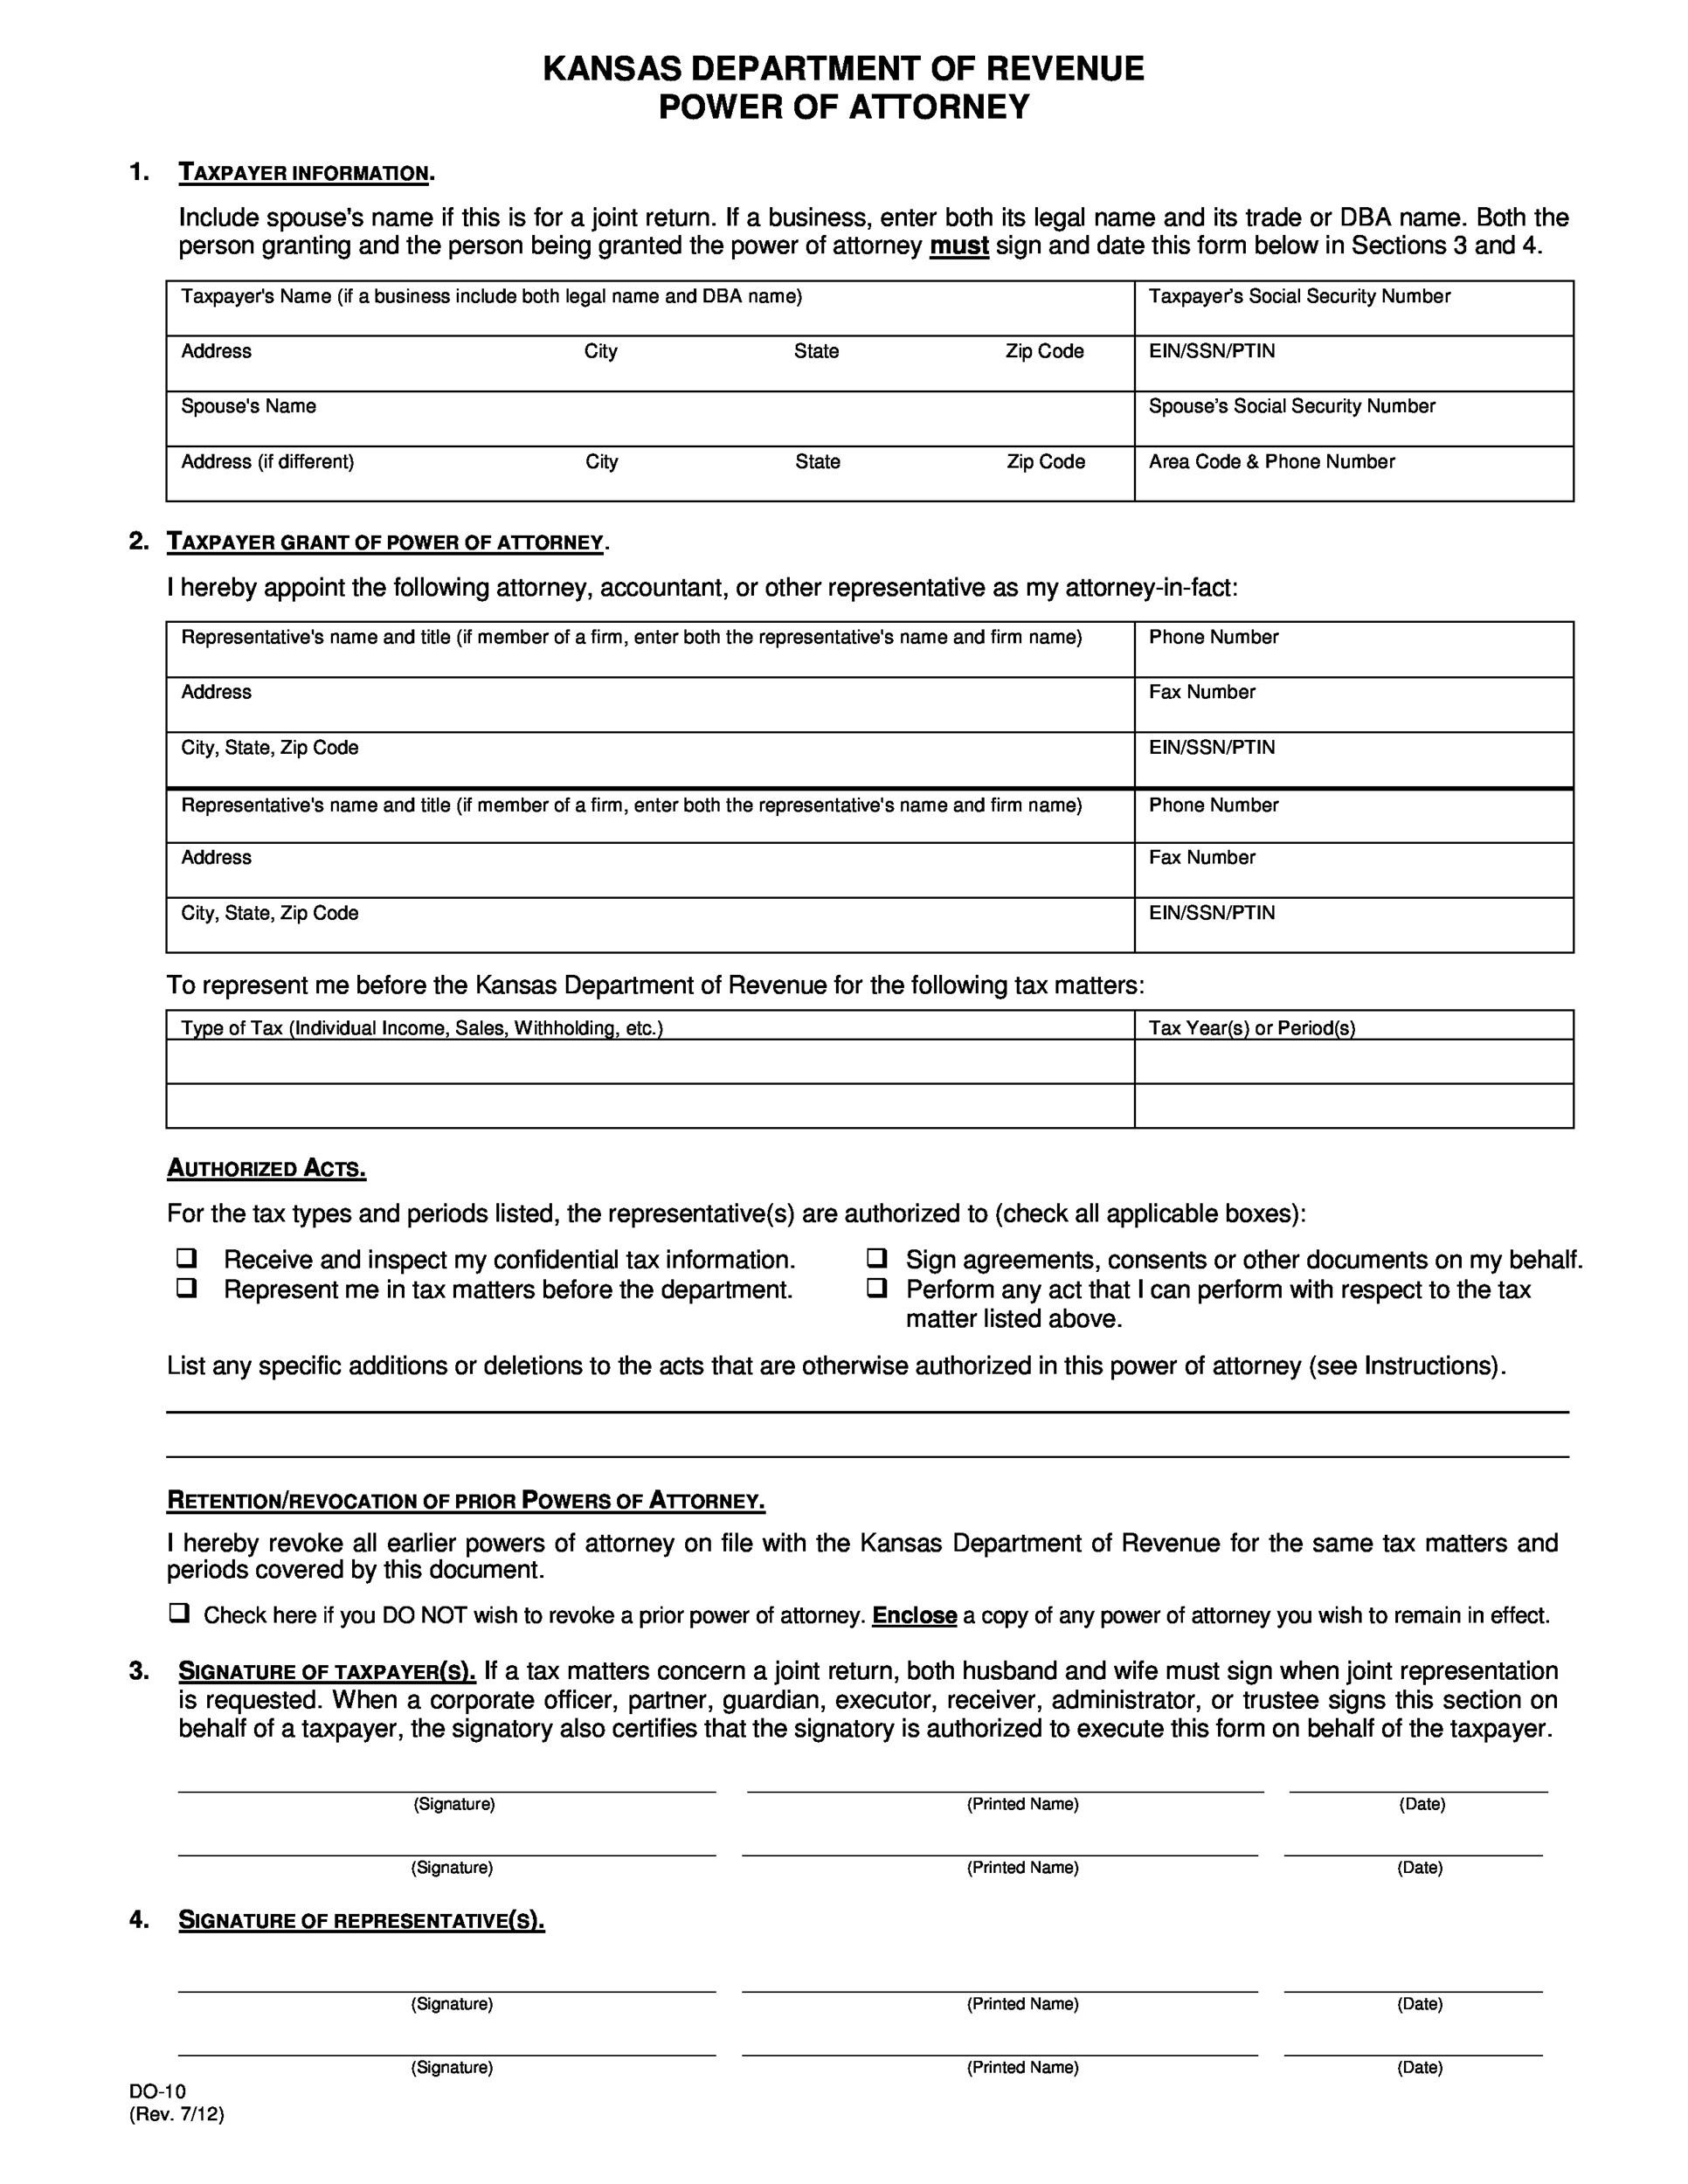 Dramatic Power of Attorney Form Free Printable | Roy Blog